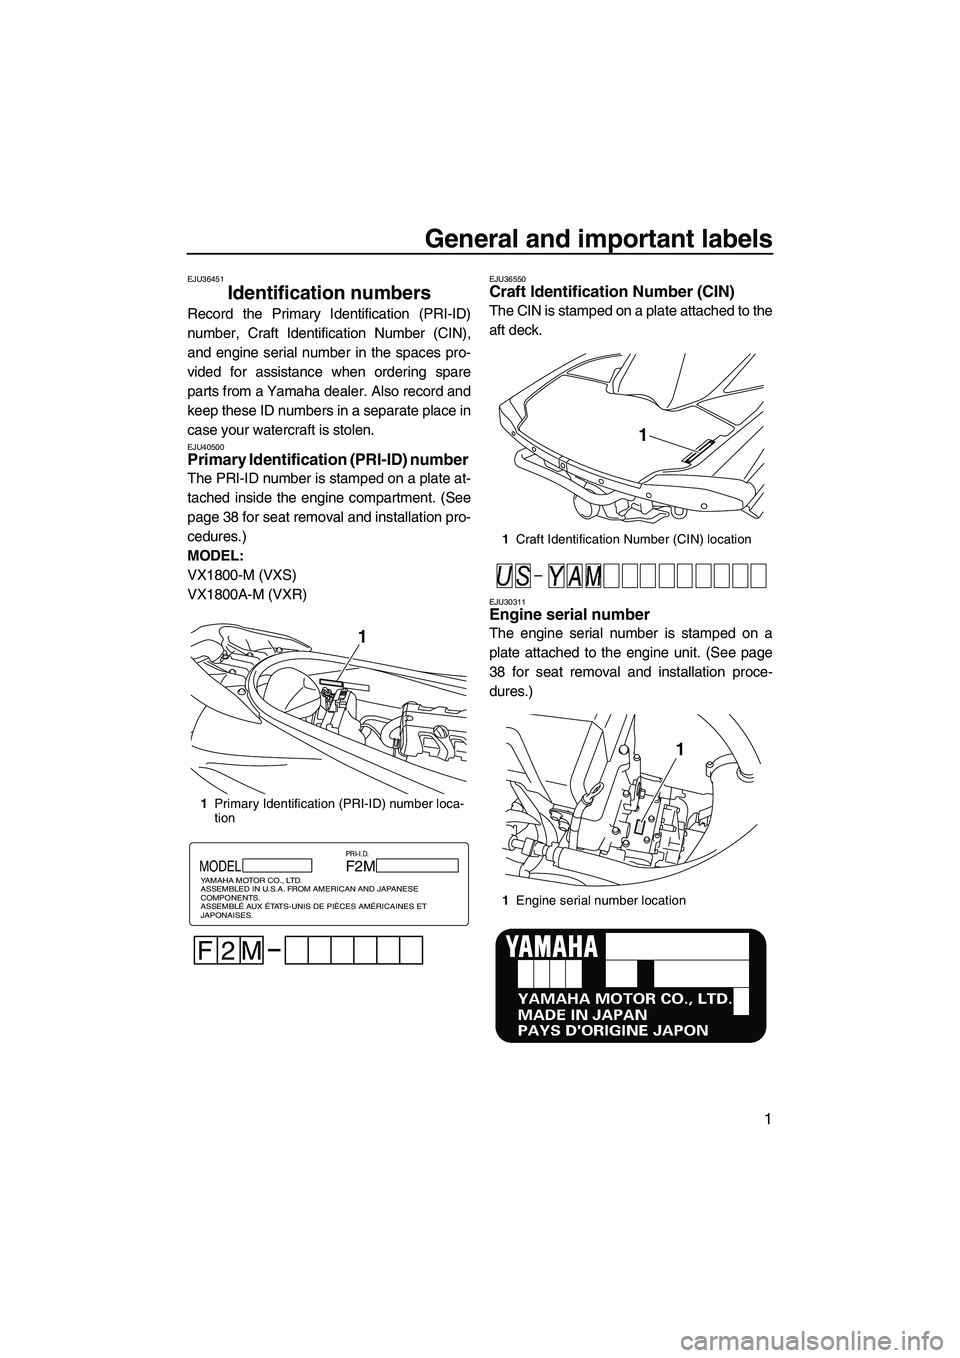 YAMAHA VXS 2013  Owners Manual General and important labels
1
EJU36451
Identification numbers 
Record the Primary Identification (PRI-ID)
number, Craft Identification Number (CIN),
and engine serial number in the spaces pro-
vided 